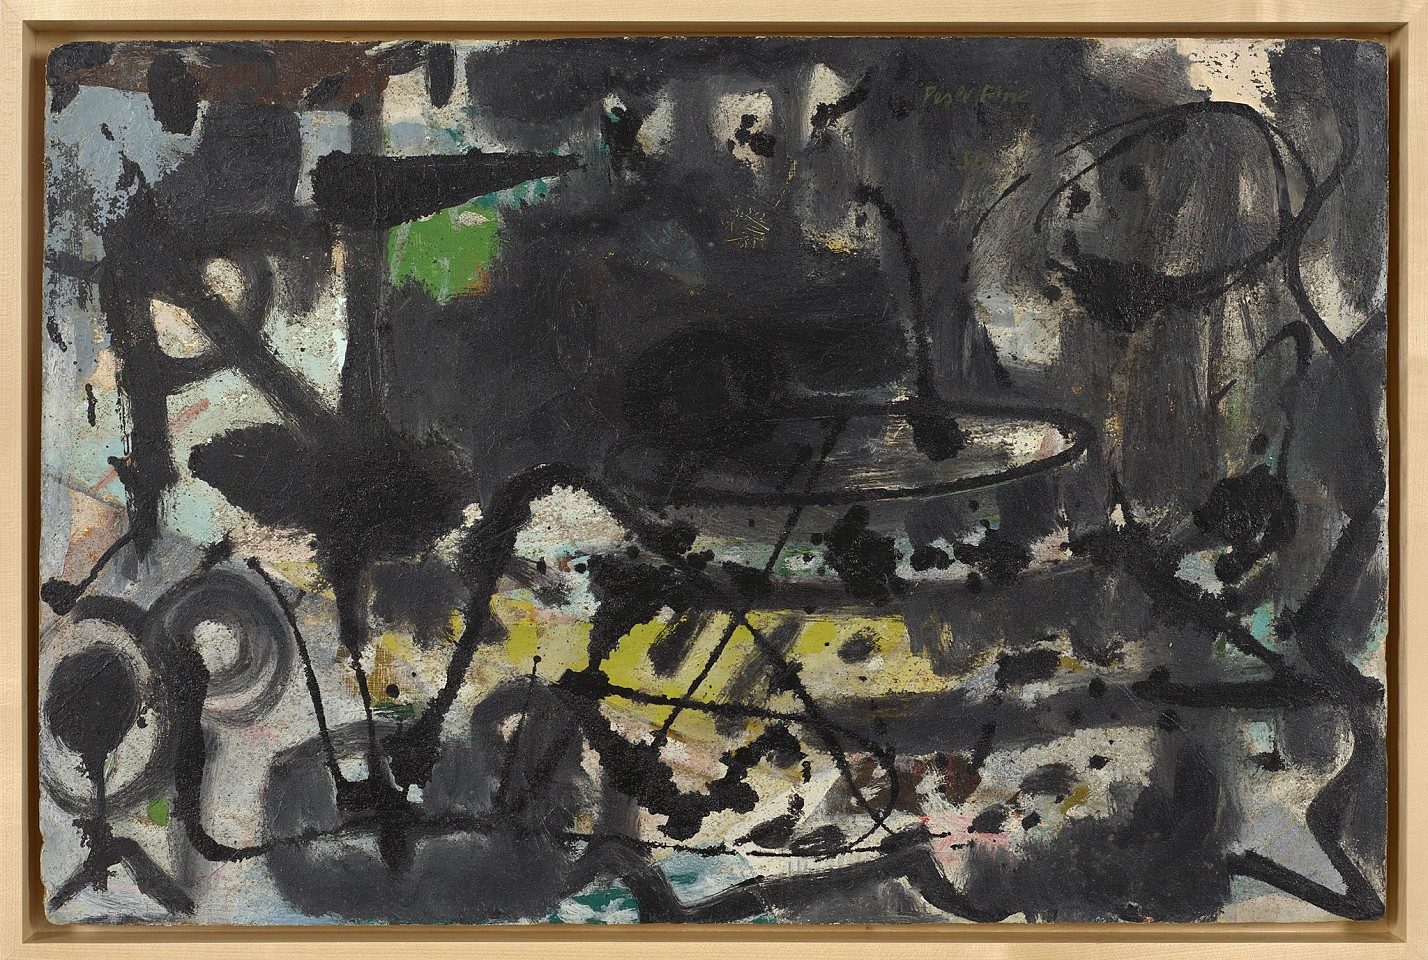 Perle Fine, Untitled | SOLD, 1950
Oil and sand on board, 23 1/2 x 36 in. (59.7 x 91.4 cm)
FIN-00137